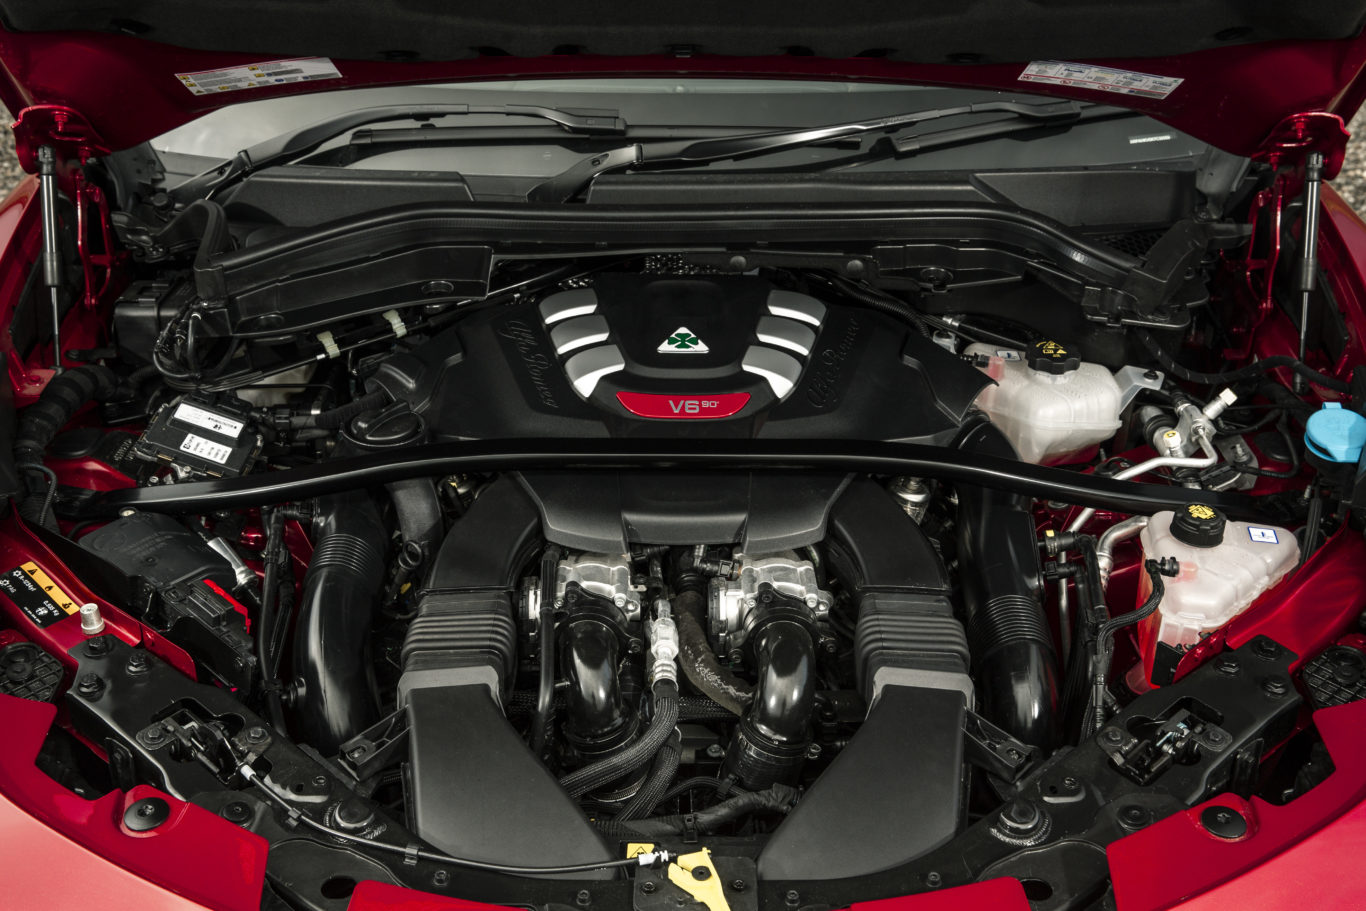 The Stelvio's V6 engine is supremely powerful